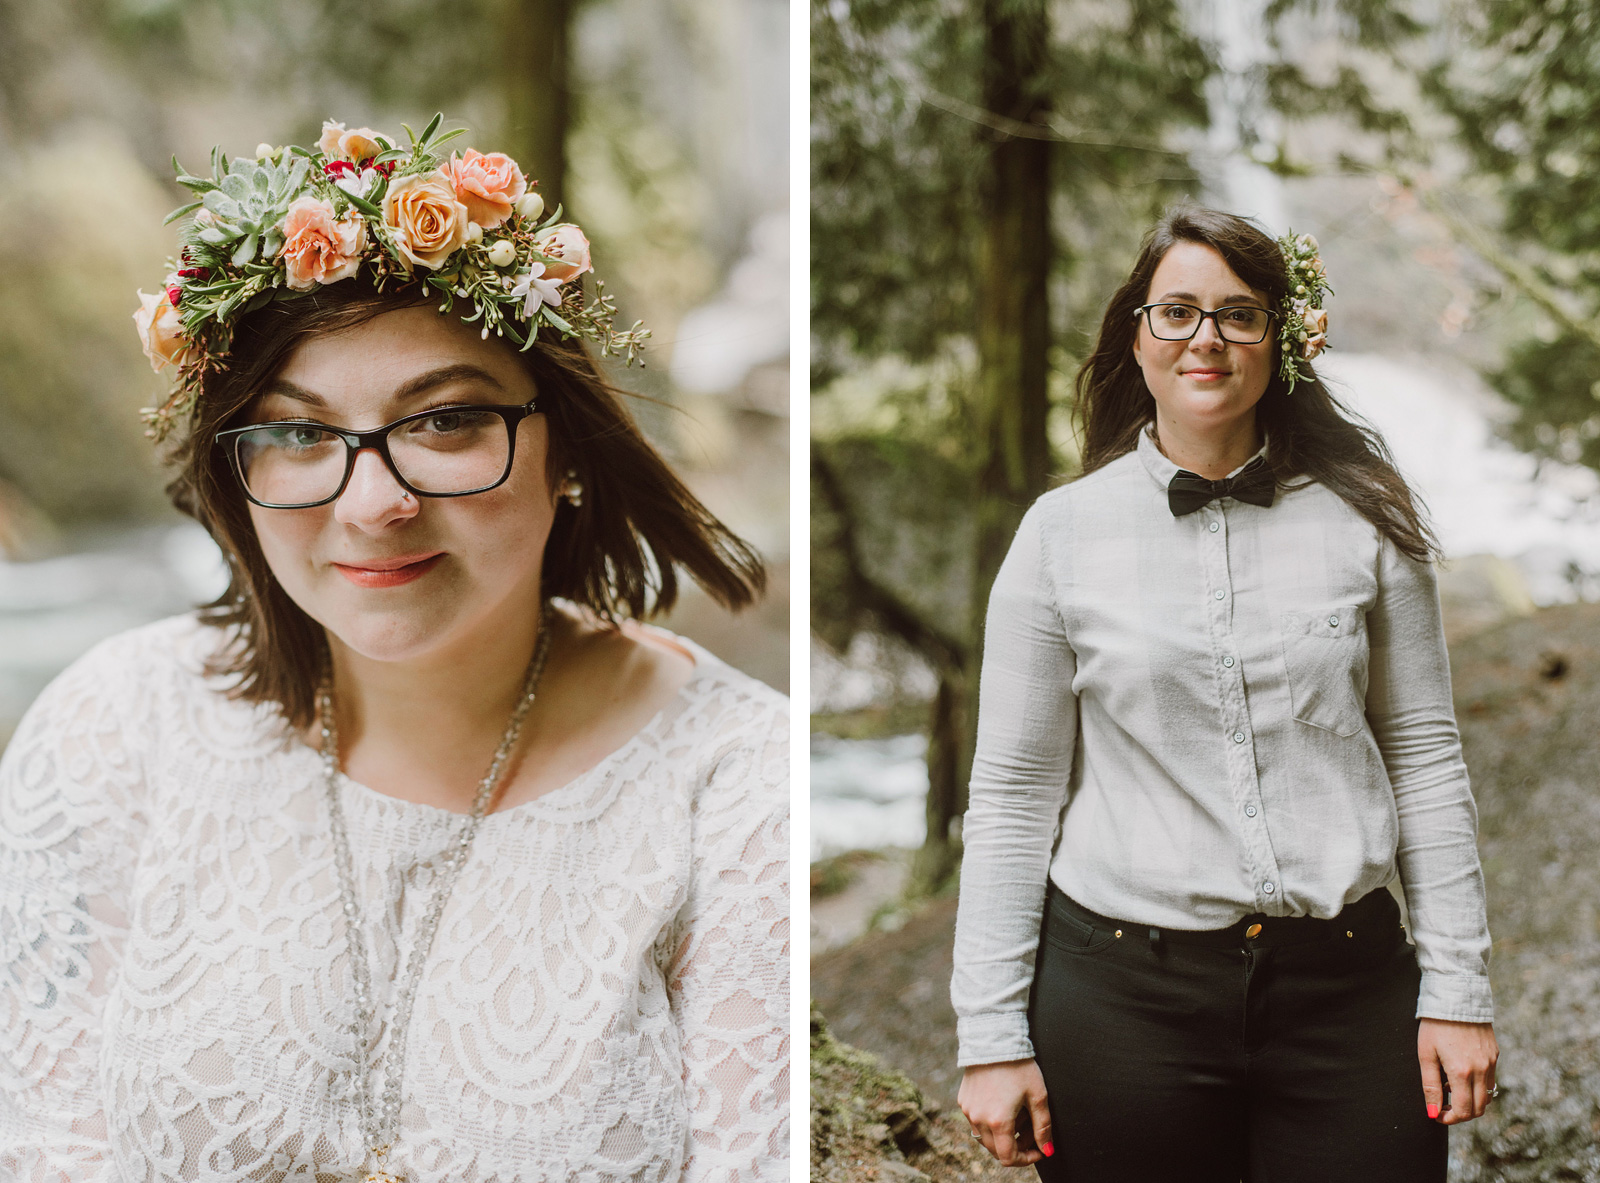 Portraits of the brides at a Portland waterfall elopement